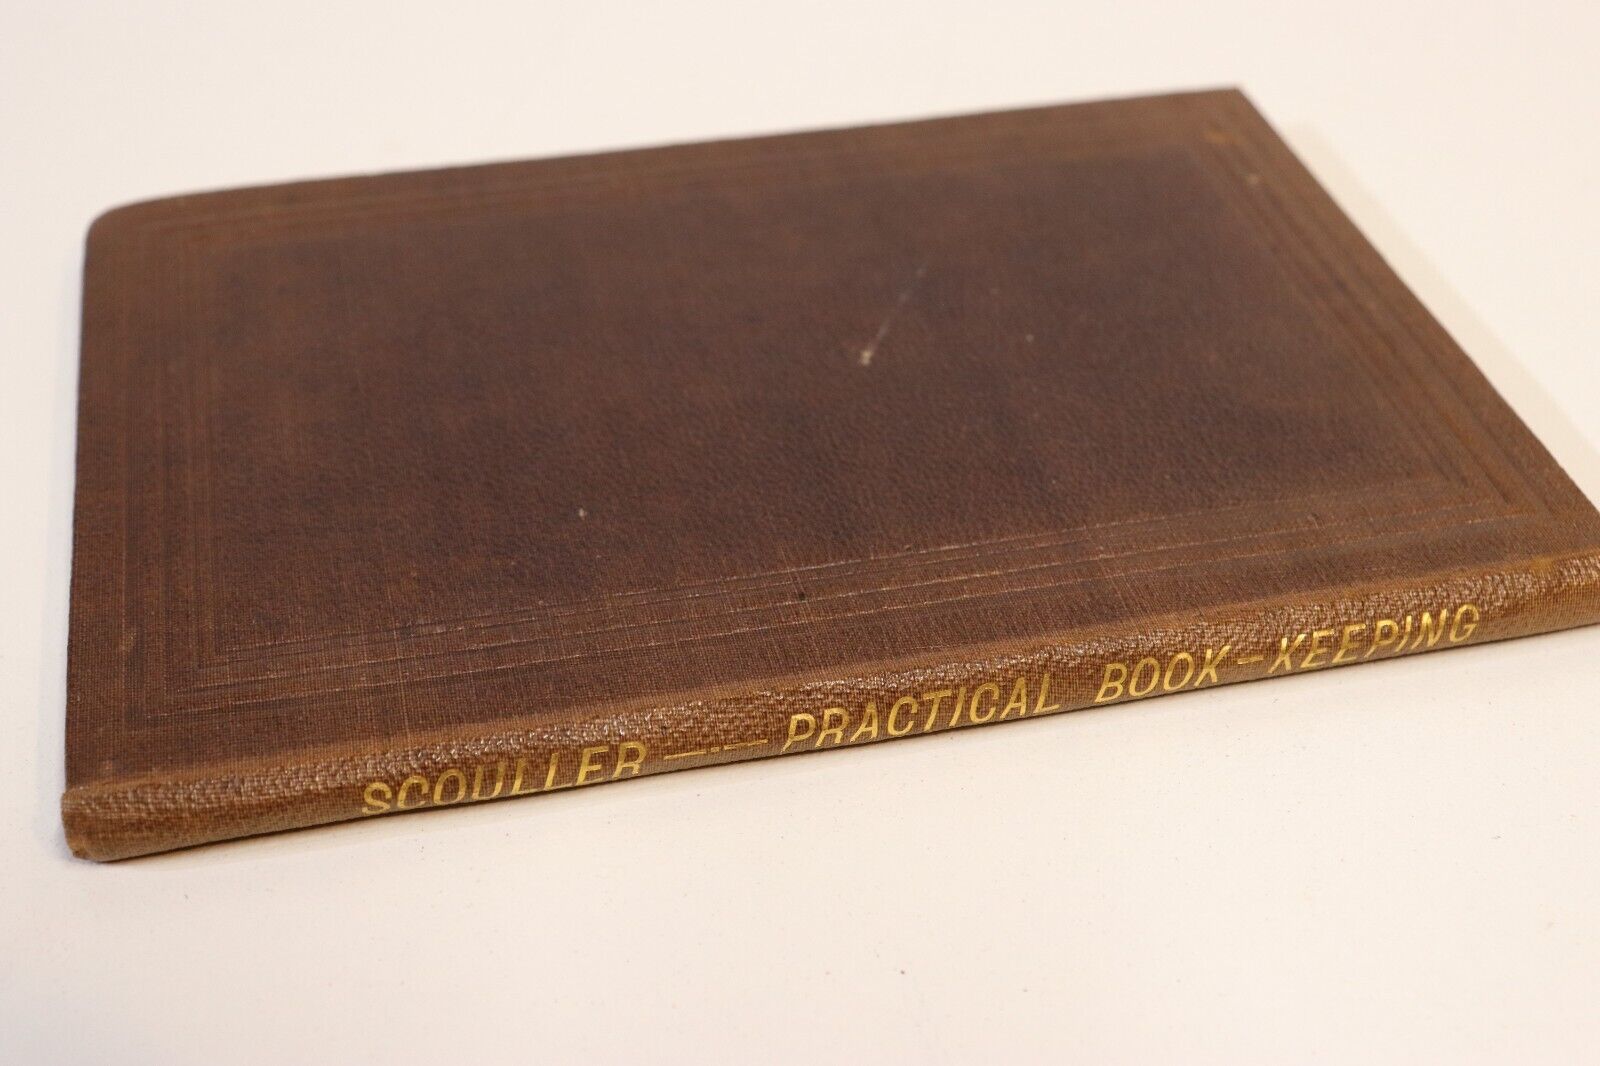 Practical Book-Keeping by J Scouller - 1882 - Australian Finance Reference Book